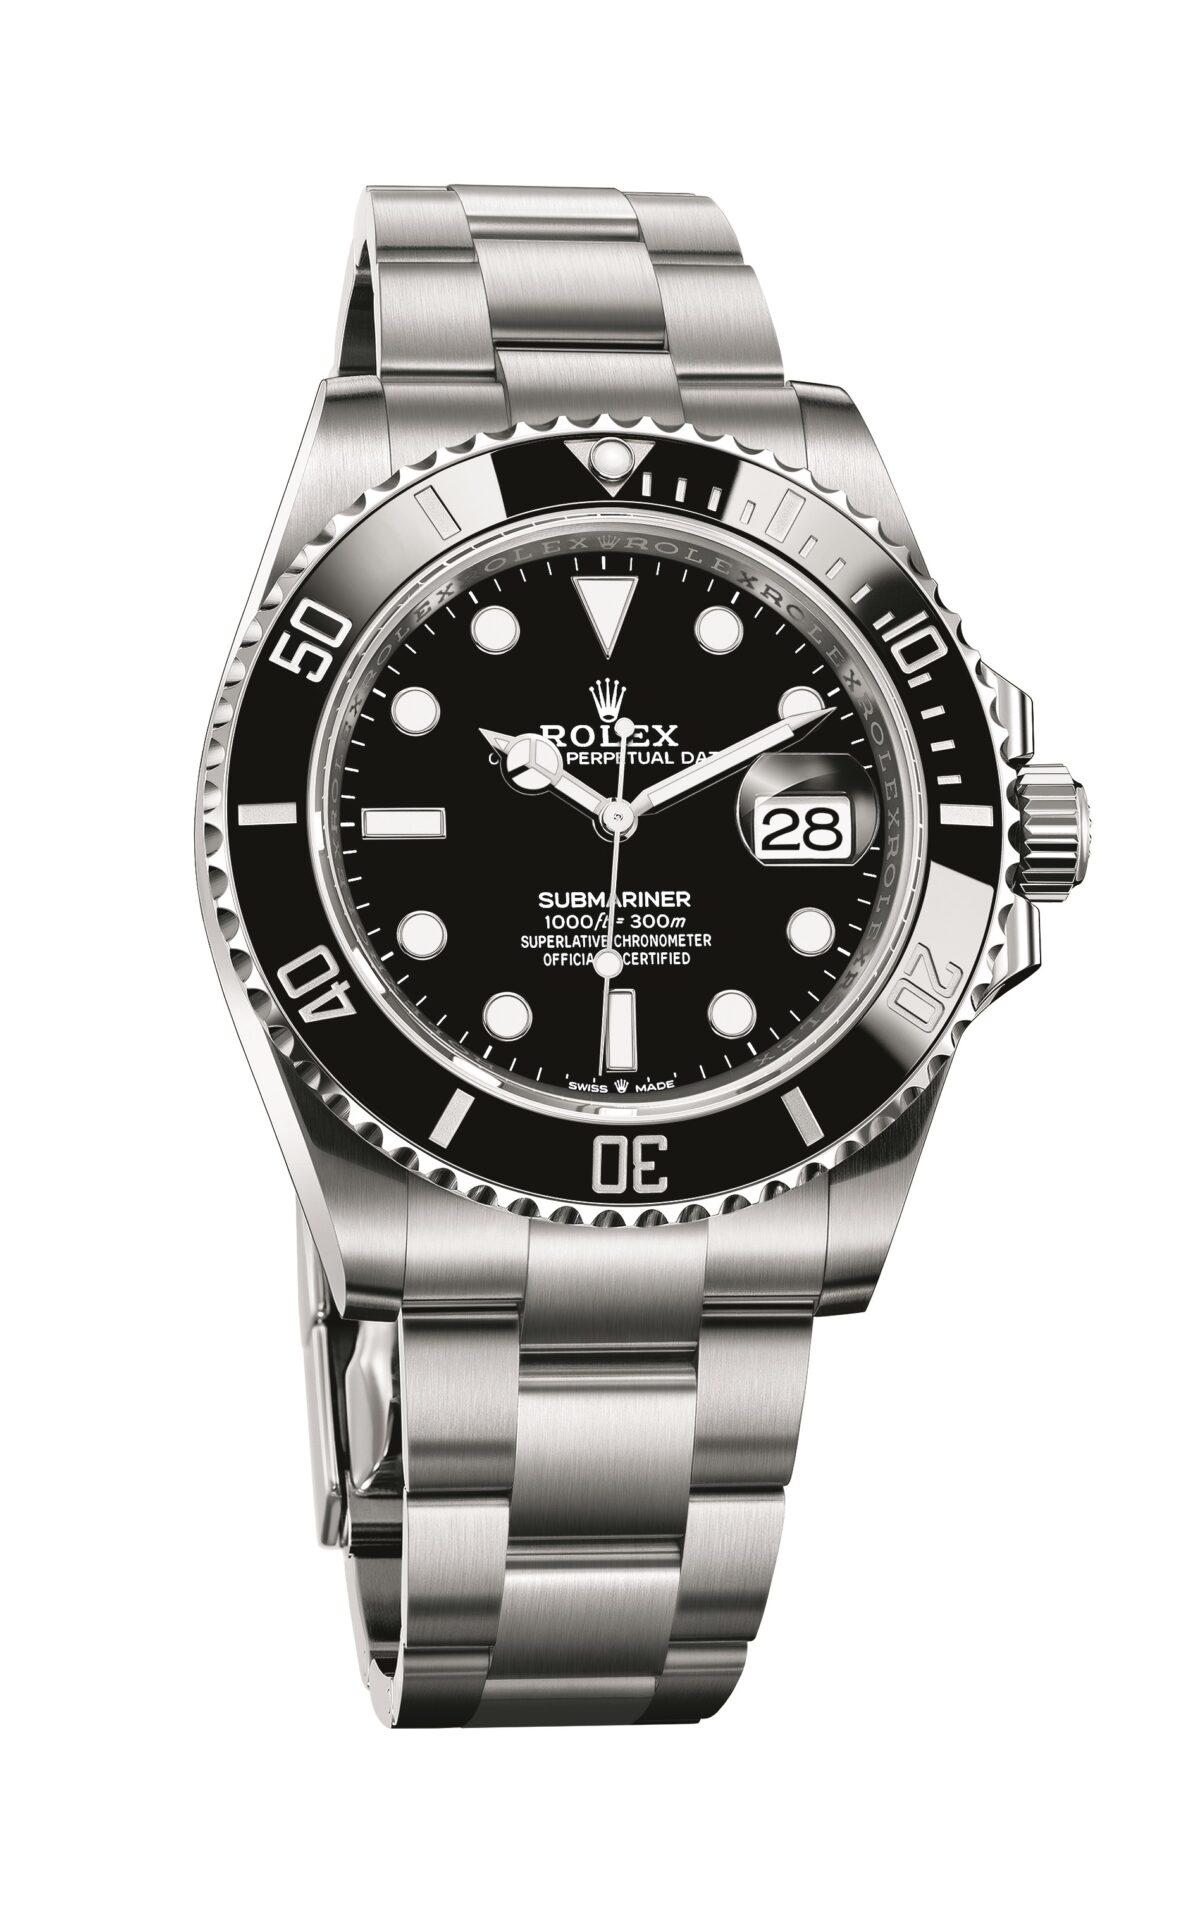 (Courtesy of Rolex)